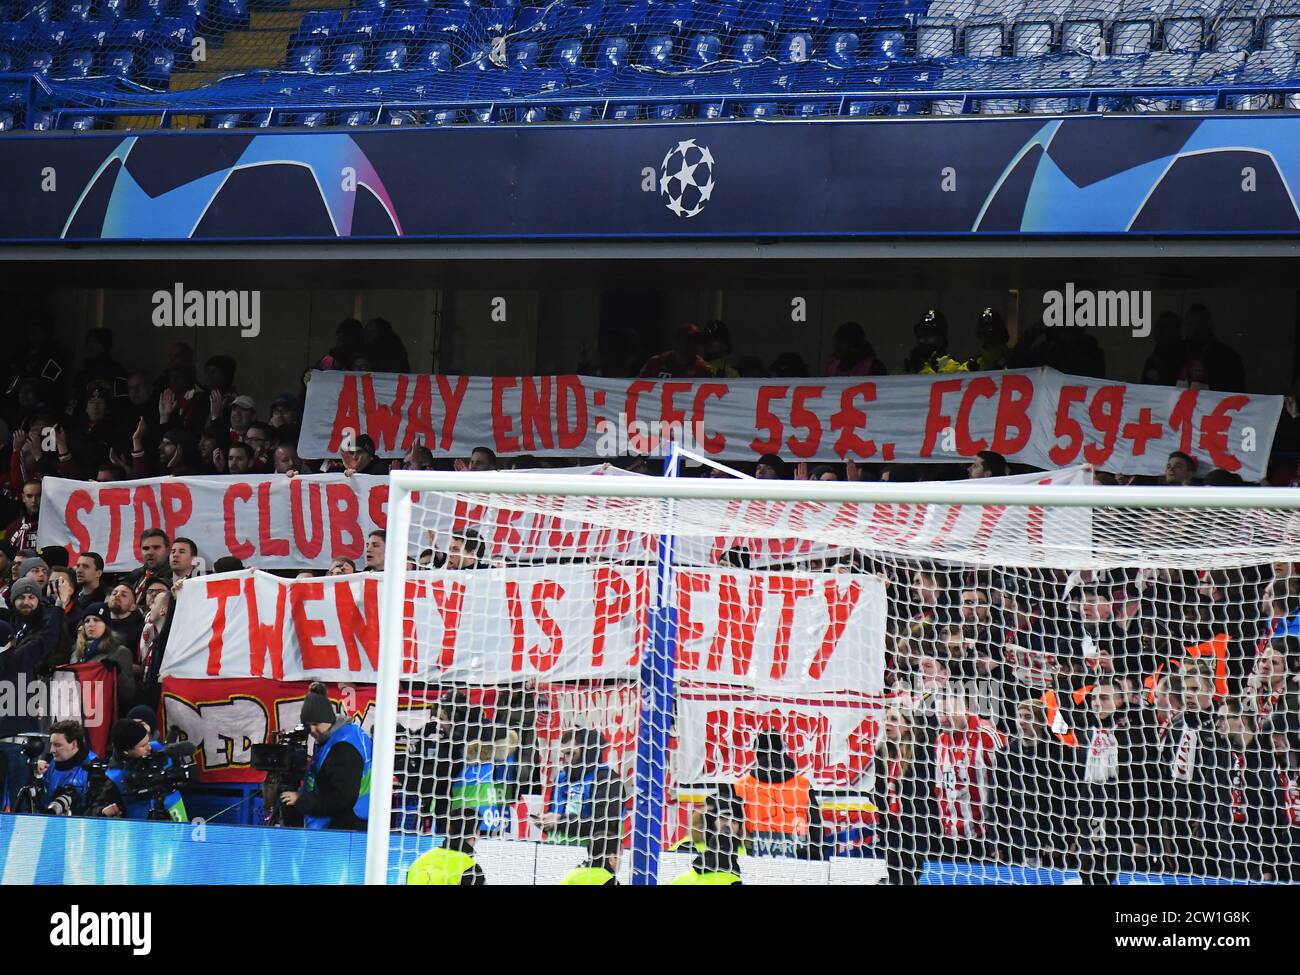 LONDON, ENGLAND - FEBRUARY 26, 2020: Bayern fans display a protest banner during the 2019/20 UEFA Champions League Round of 16 game between Chelsea FC and Bayern Munich at Stamford Bridge. Stock Photo